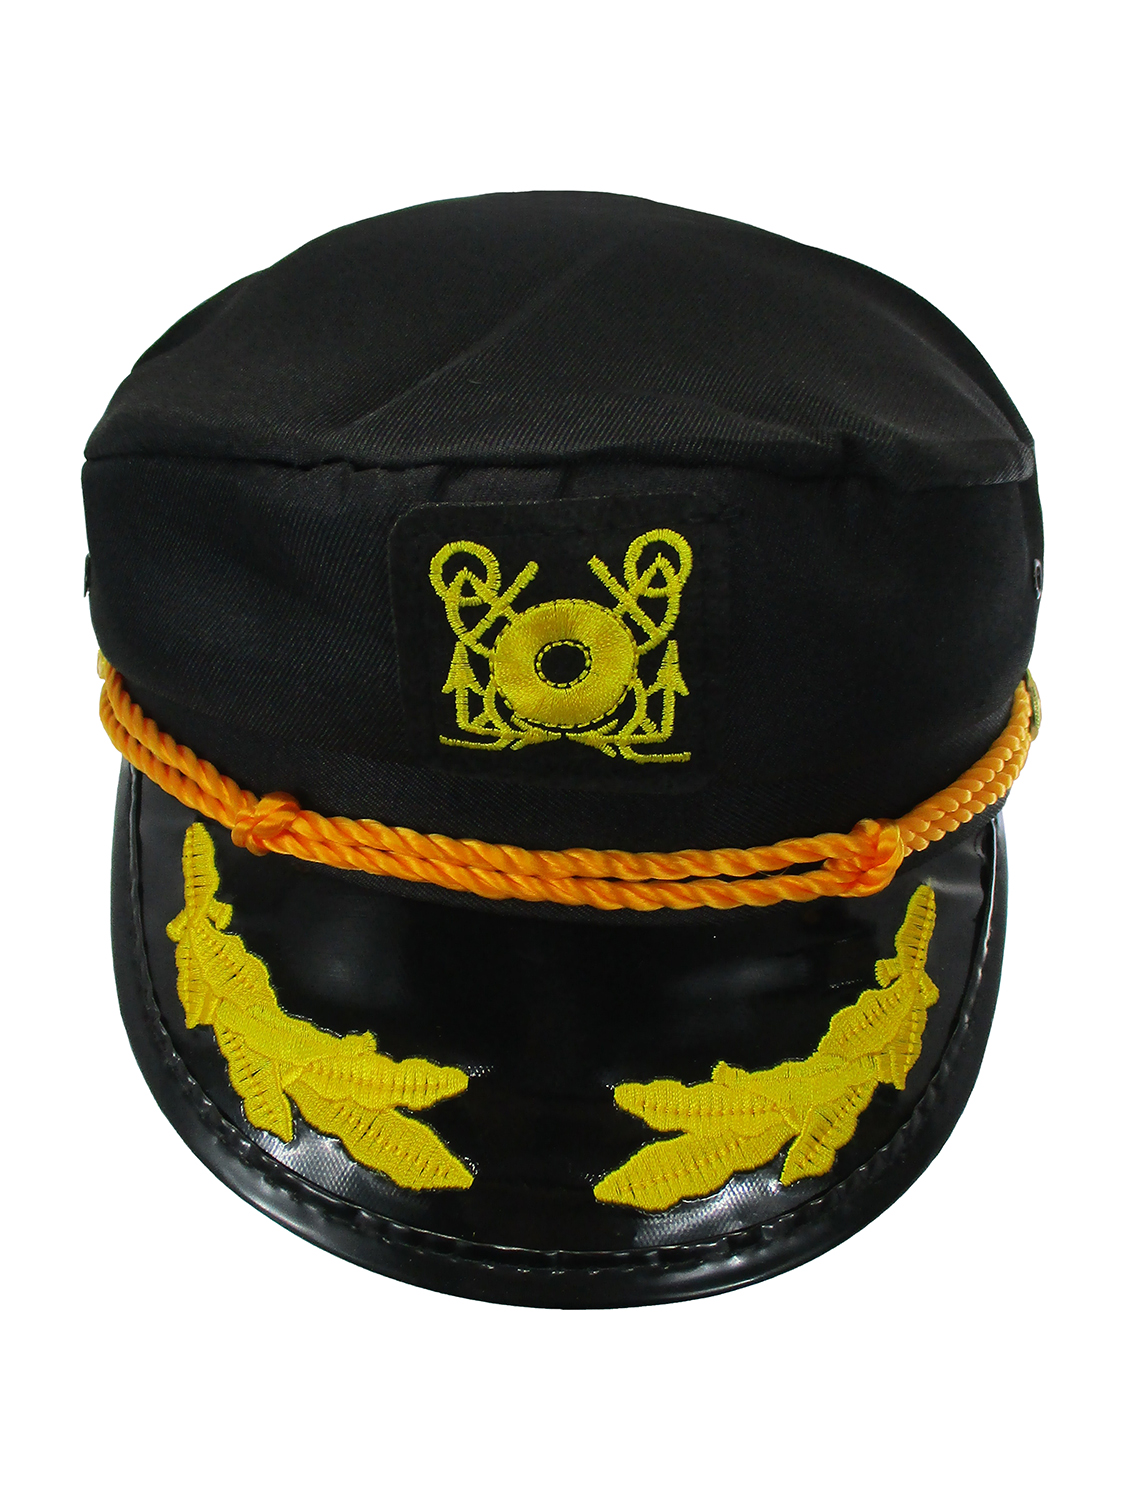 New Captain Hat Adult Quality Satin One Size Adult Naval Officer Fancy Dress 